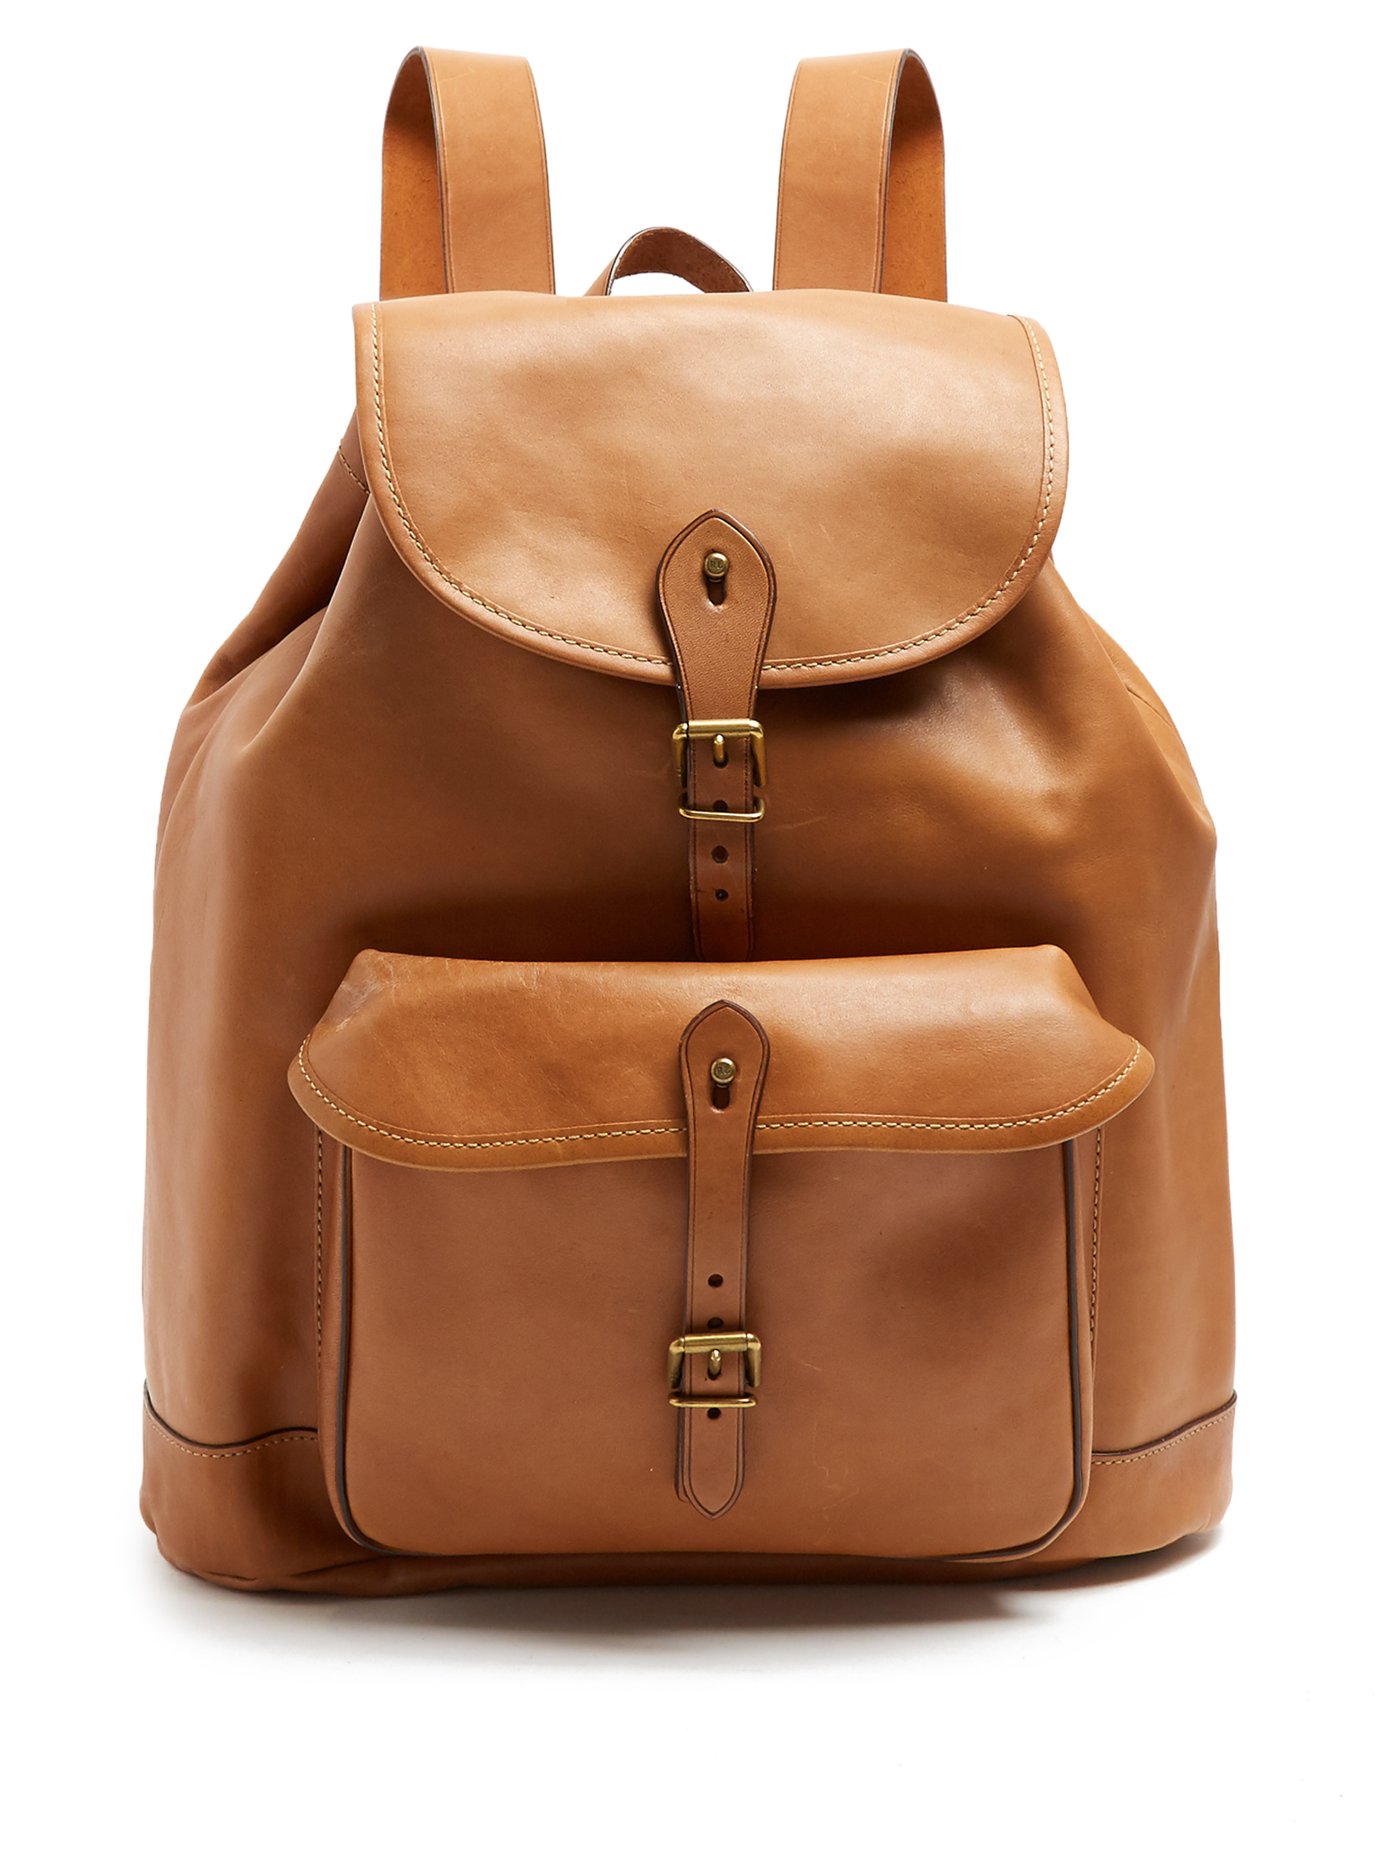 polo backpack leather